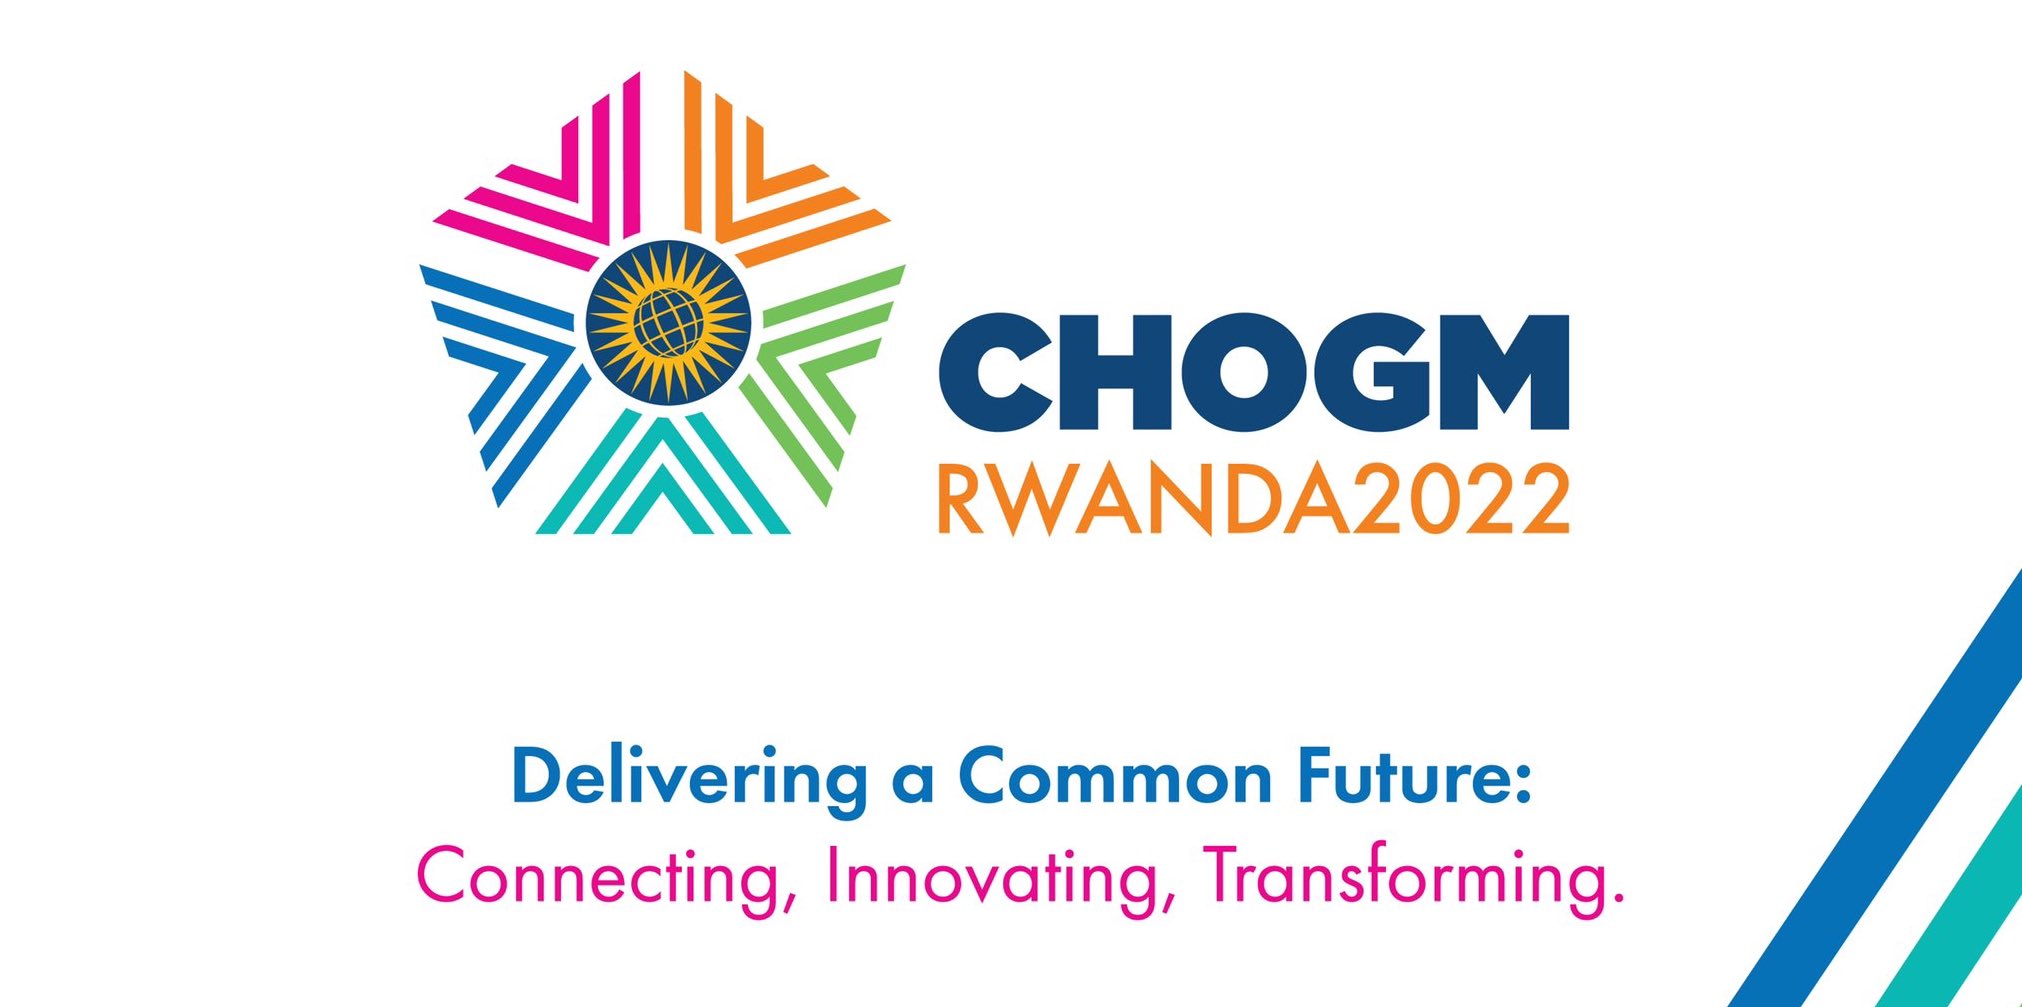 CHOGM: A chance to focus on the future